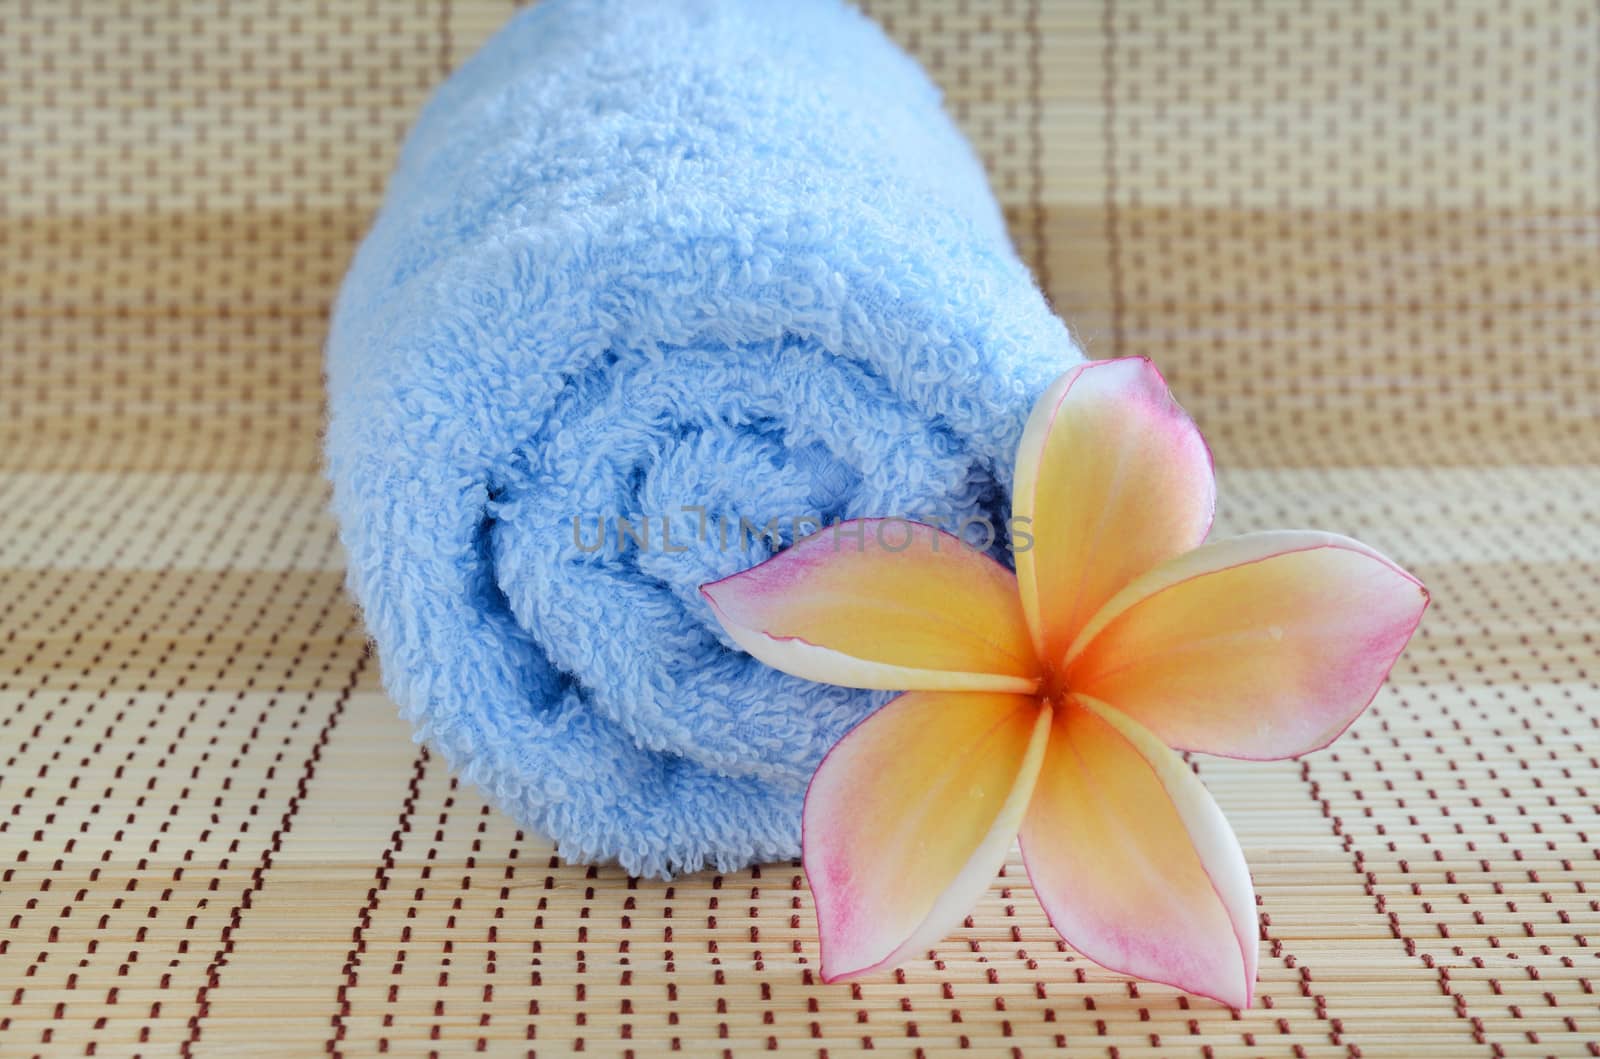 blue towel and plumeria flower on wooden background